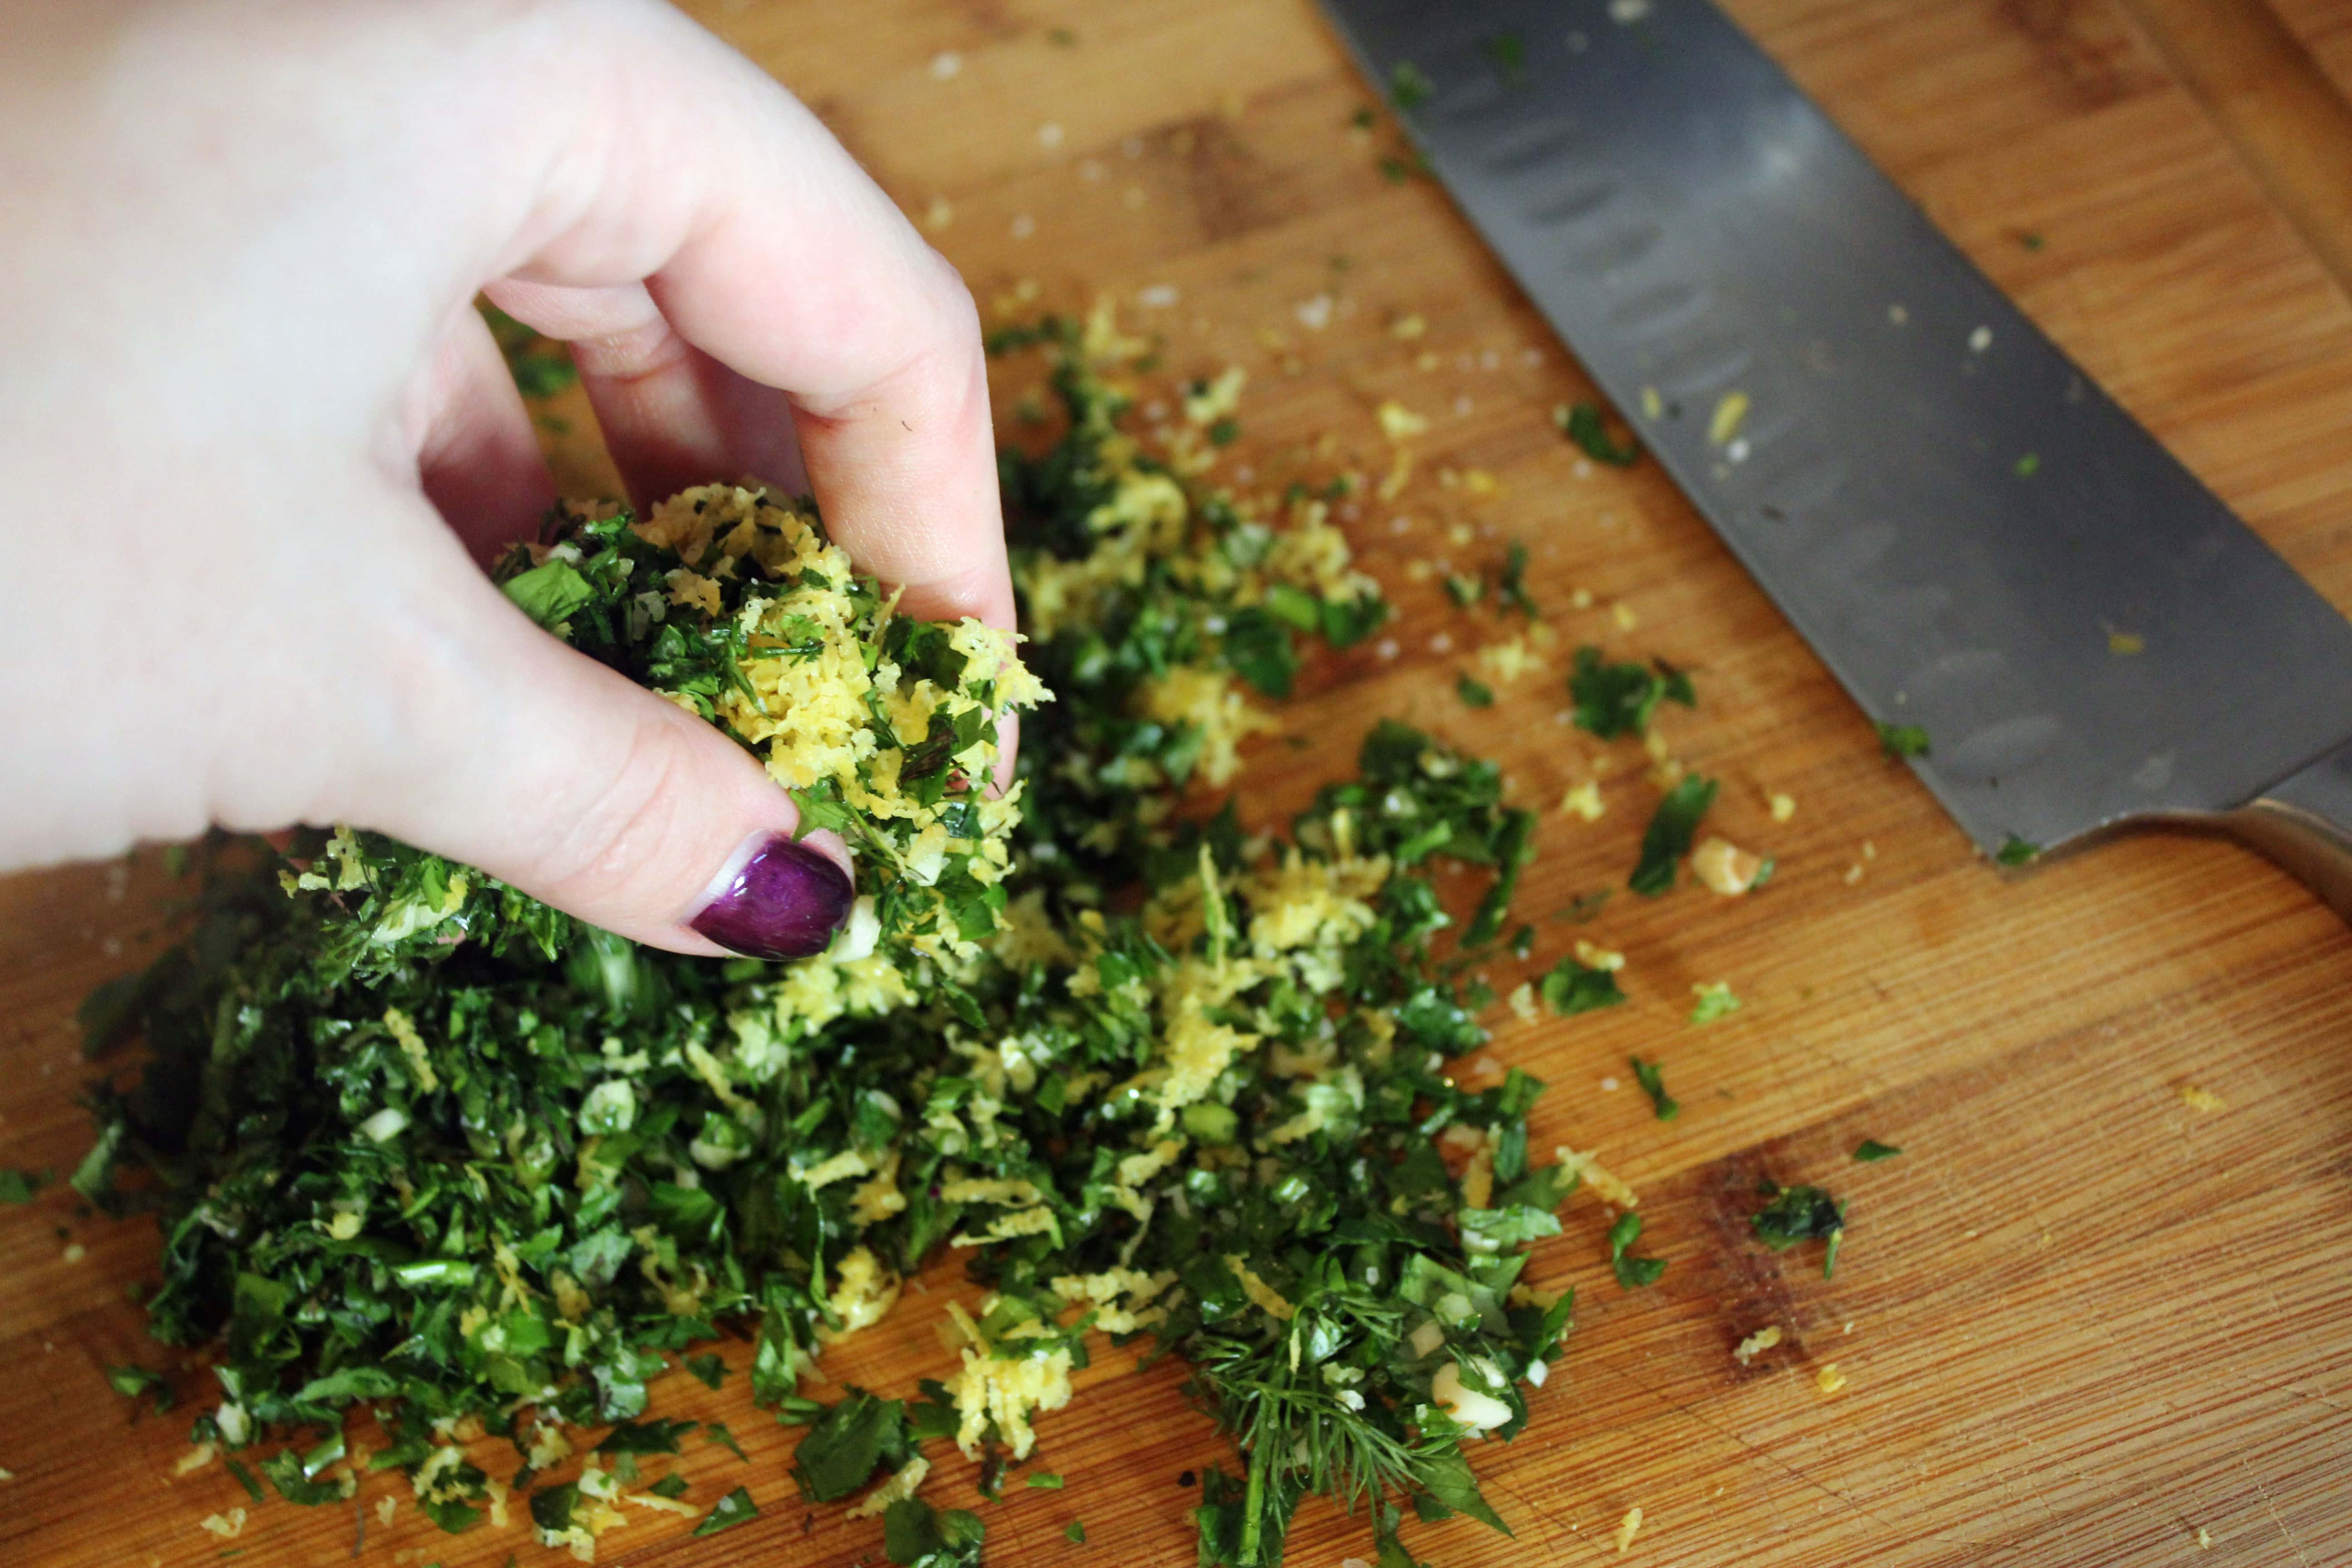 Blend zest into parsley with fingers